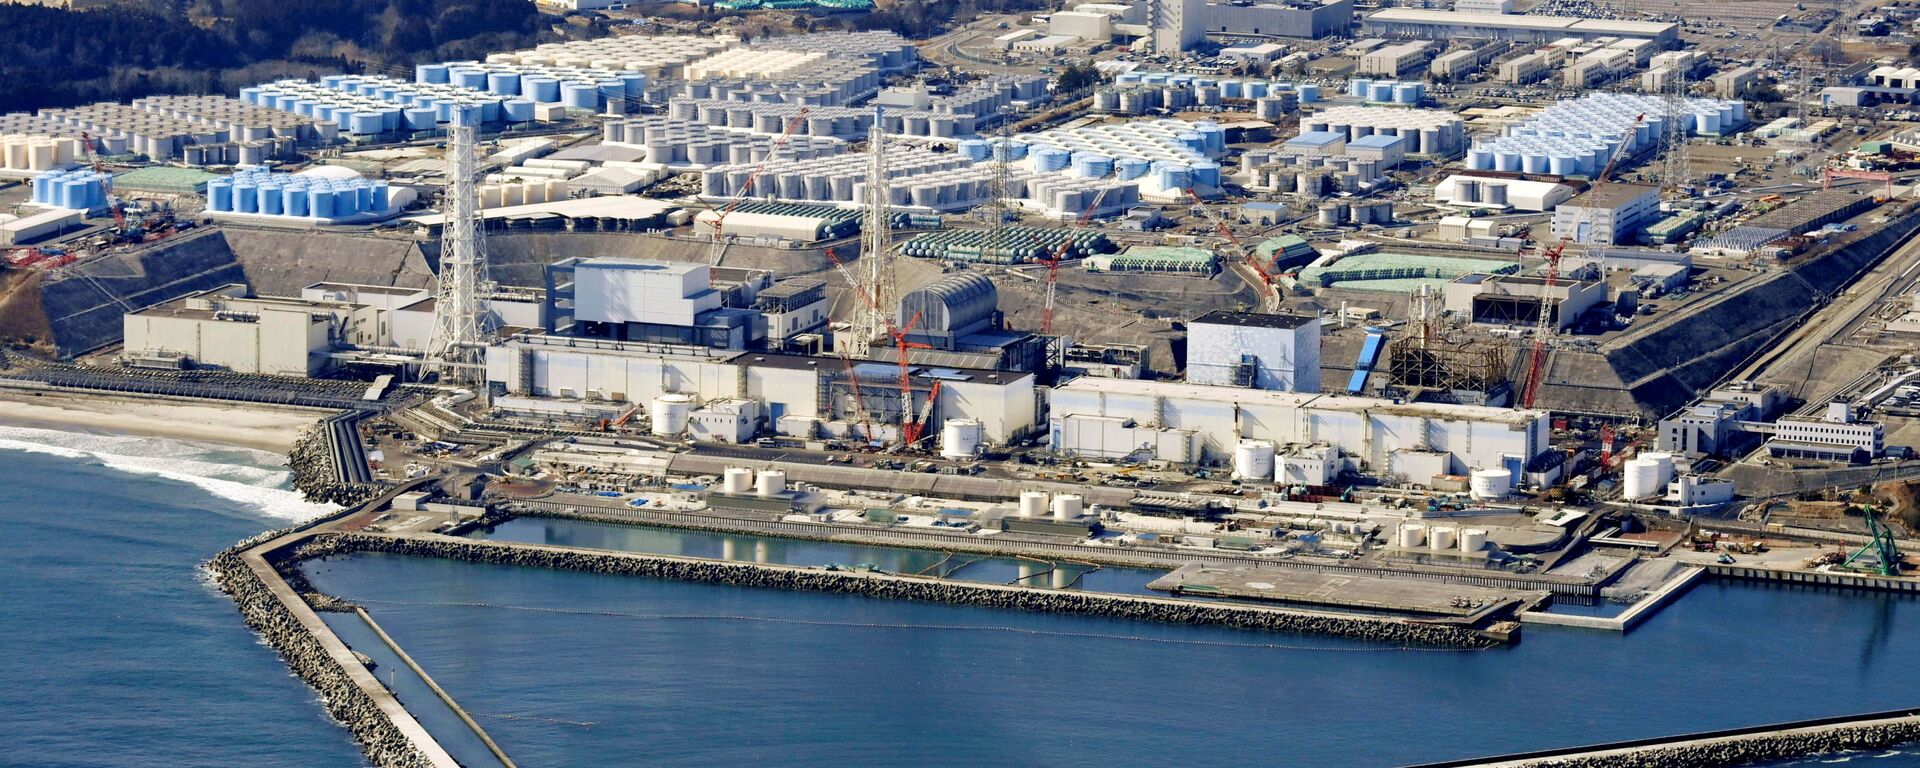 An aerial view shows the storage tanks for treated water at the tsunami-crippled Fukushima Daiichi nuclear power plant in Okuma town, Fukushima prefecture, Japan February 13, 2021, in this photo taken by Kyodo. - Sputnik International, 1920, 13.04.2021